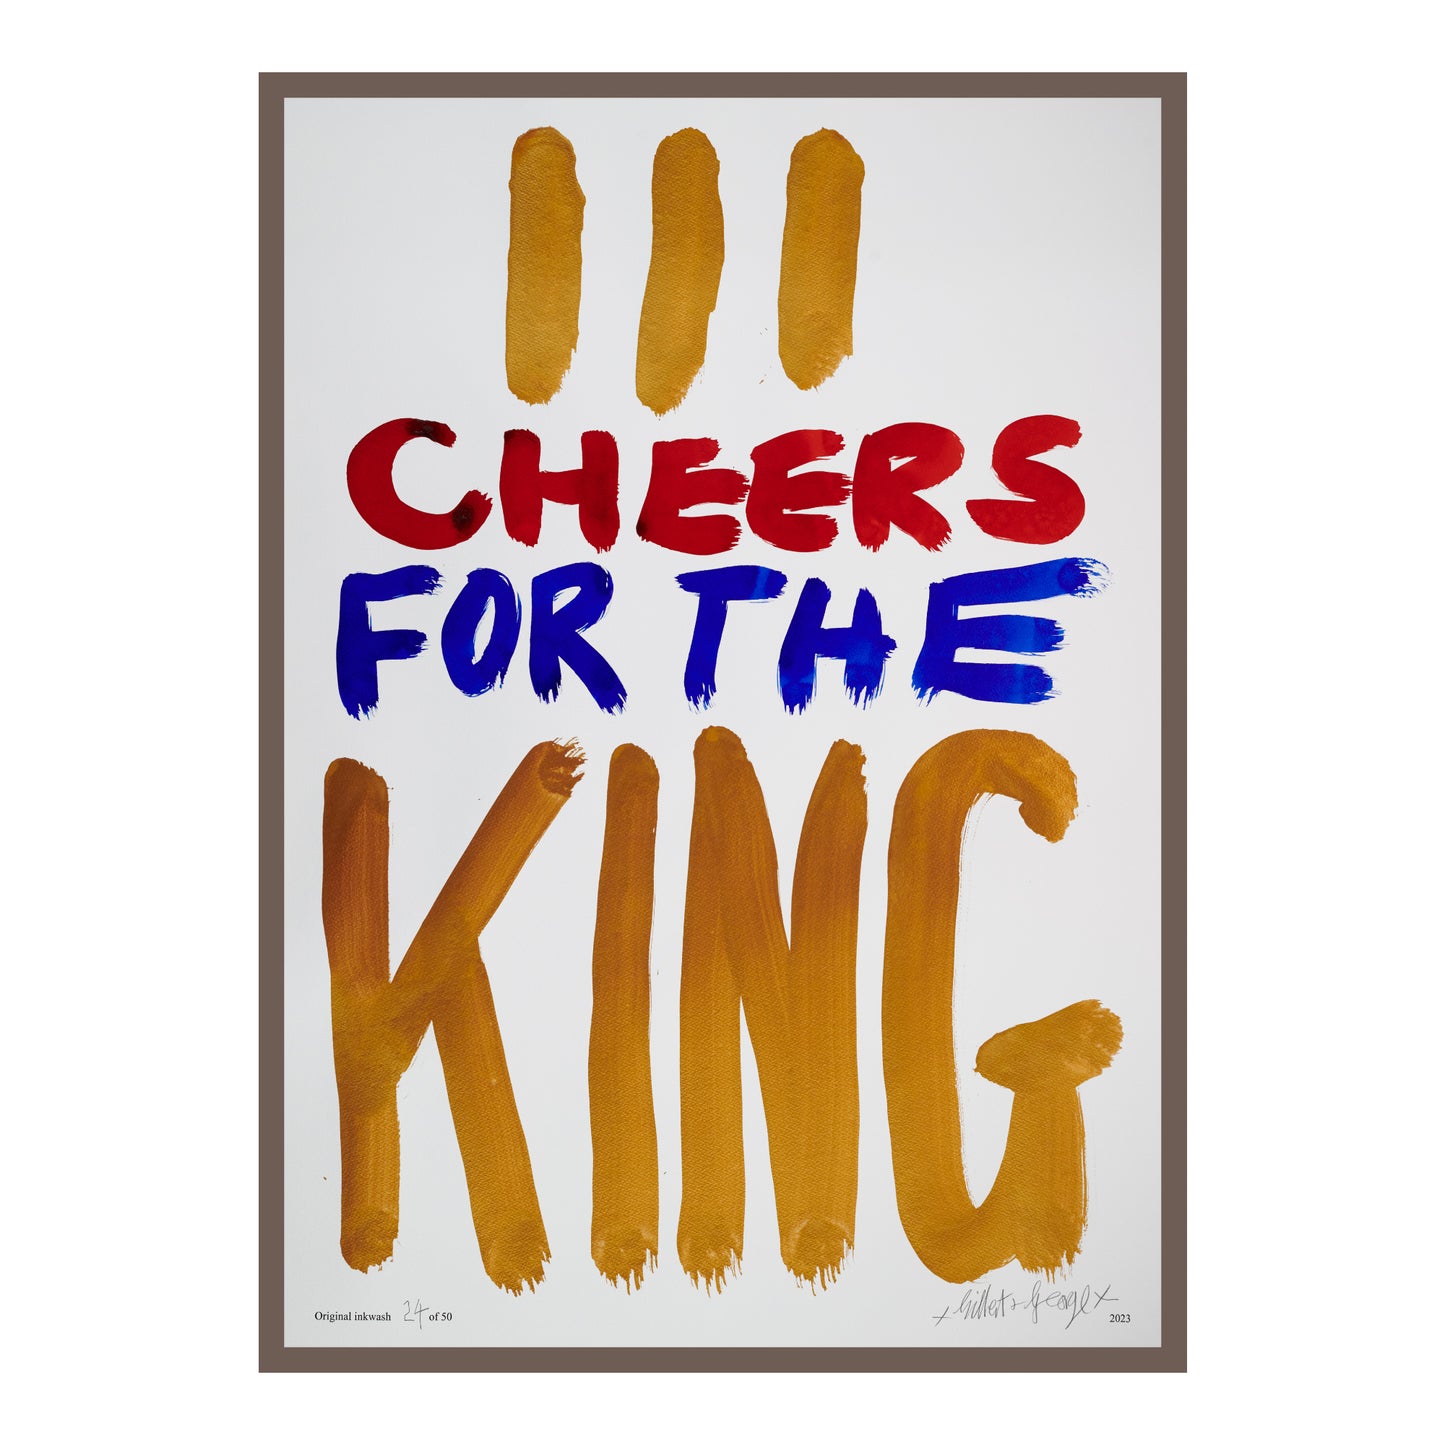 III CHEERS FOR THE KING (v)